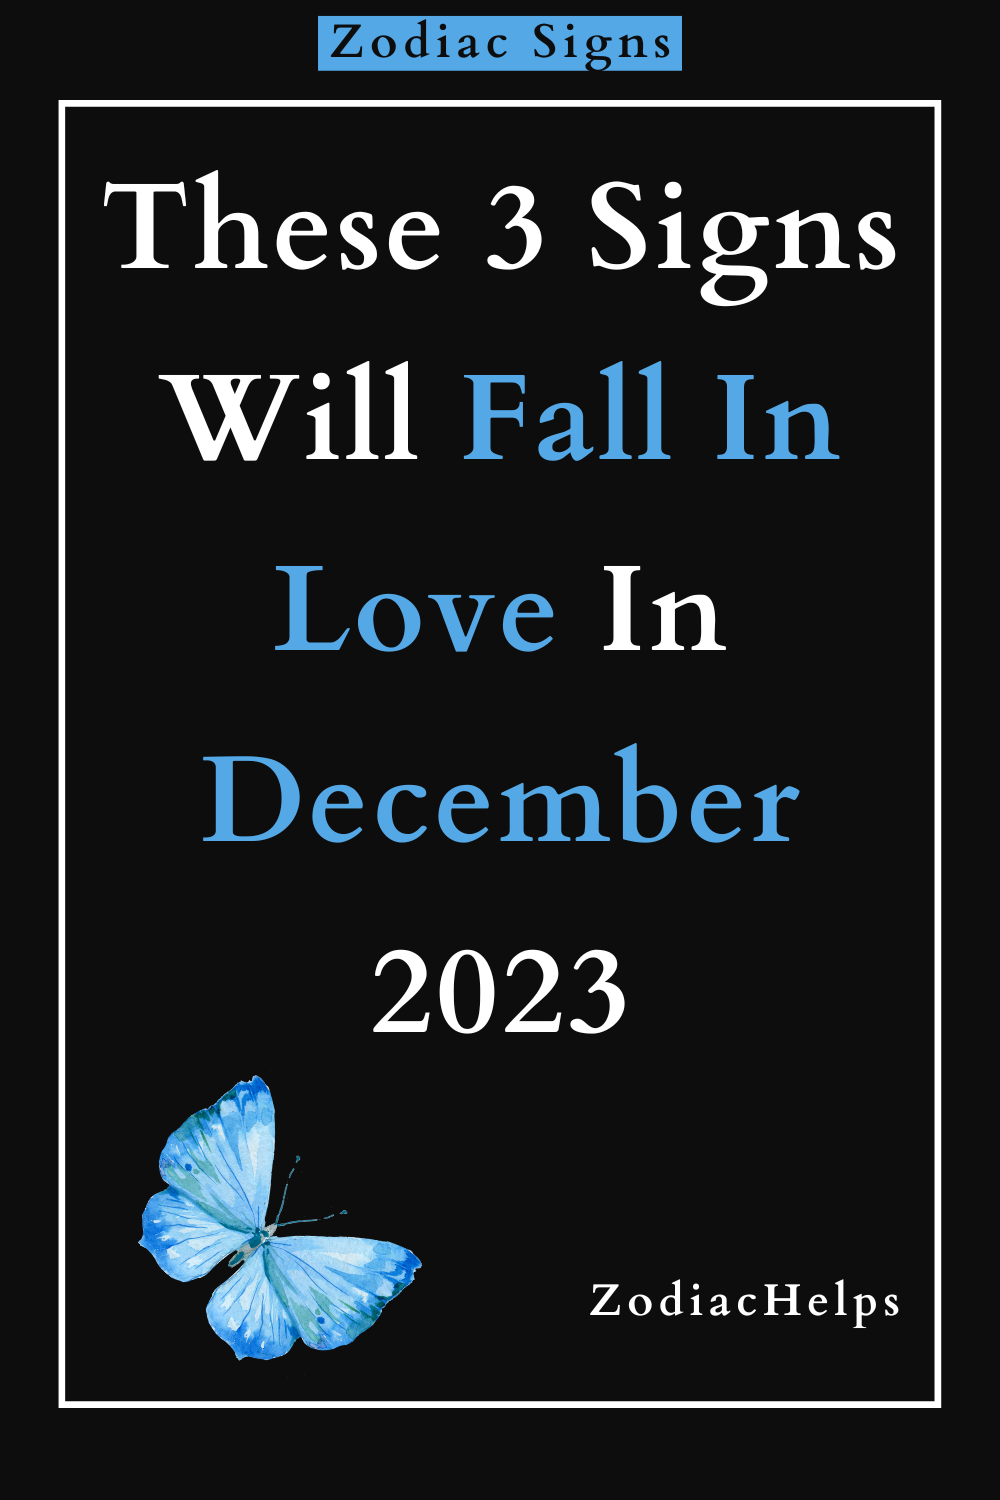 These 3 Signs Will Fall In Love In December 2023